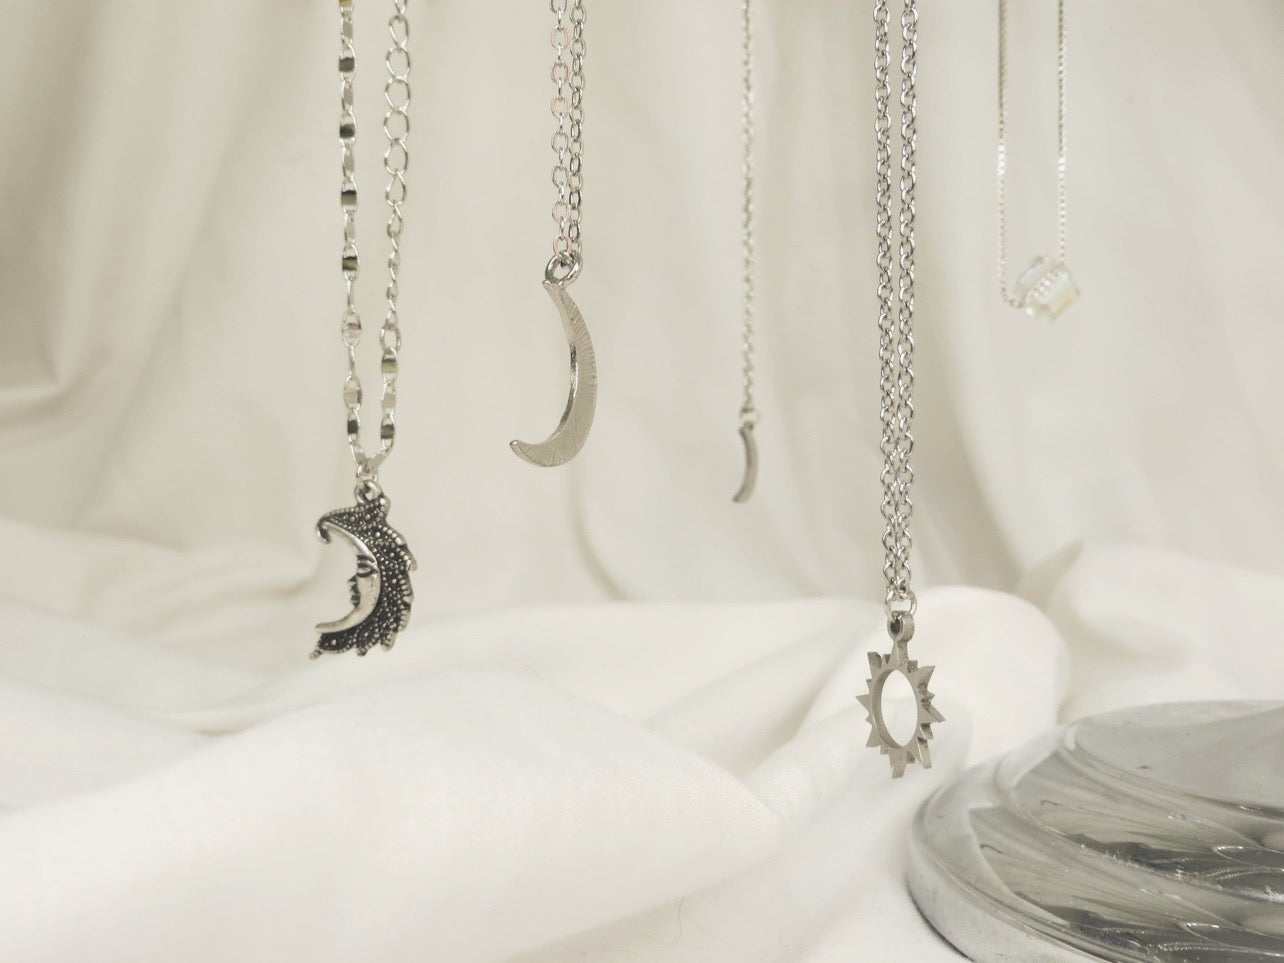 Planetary Array of Necklaces